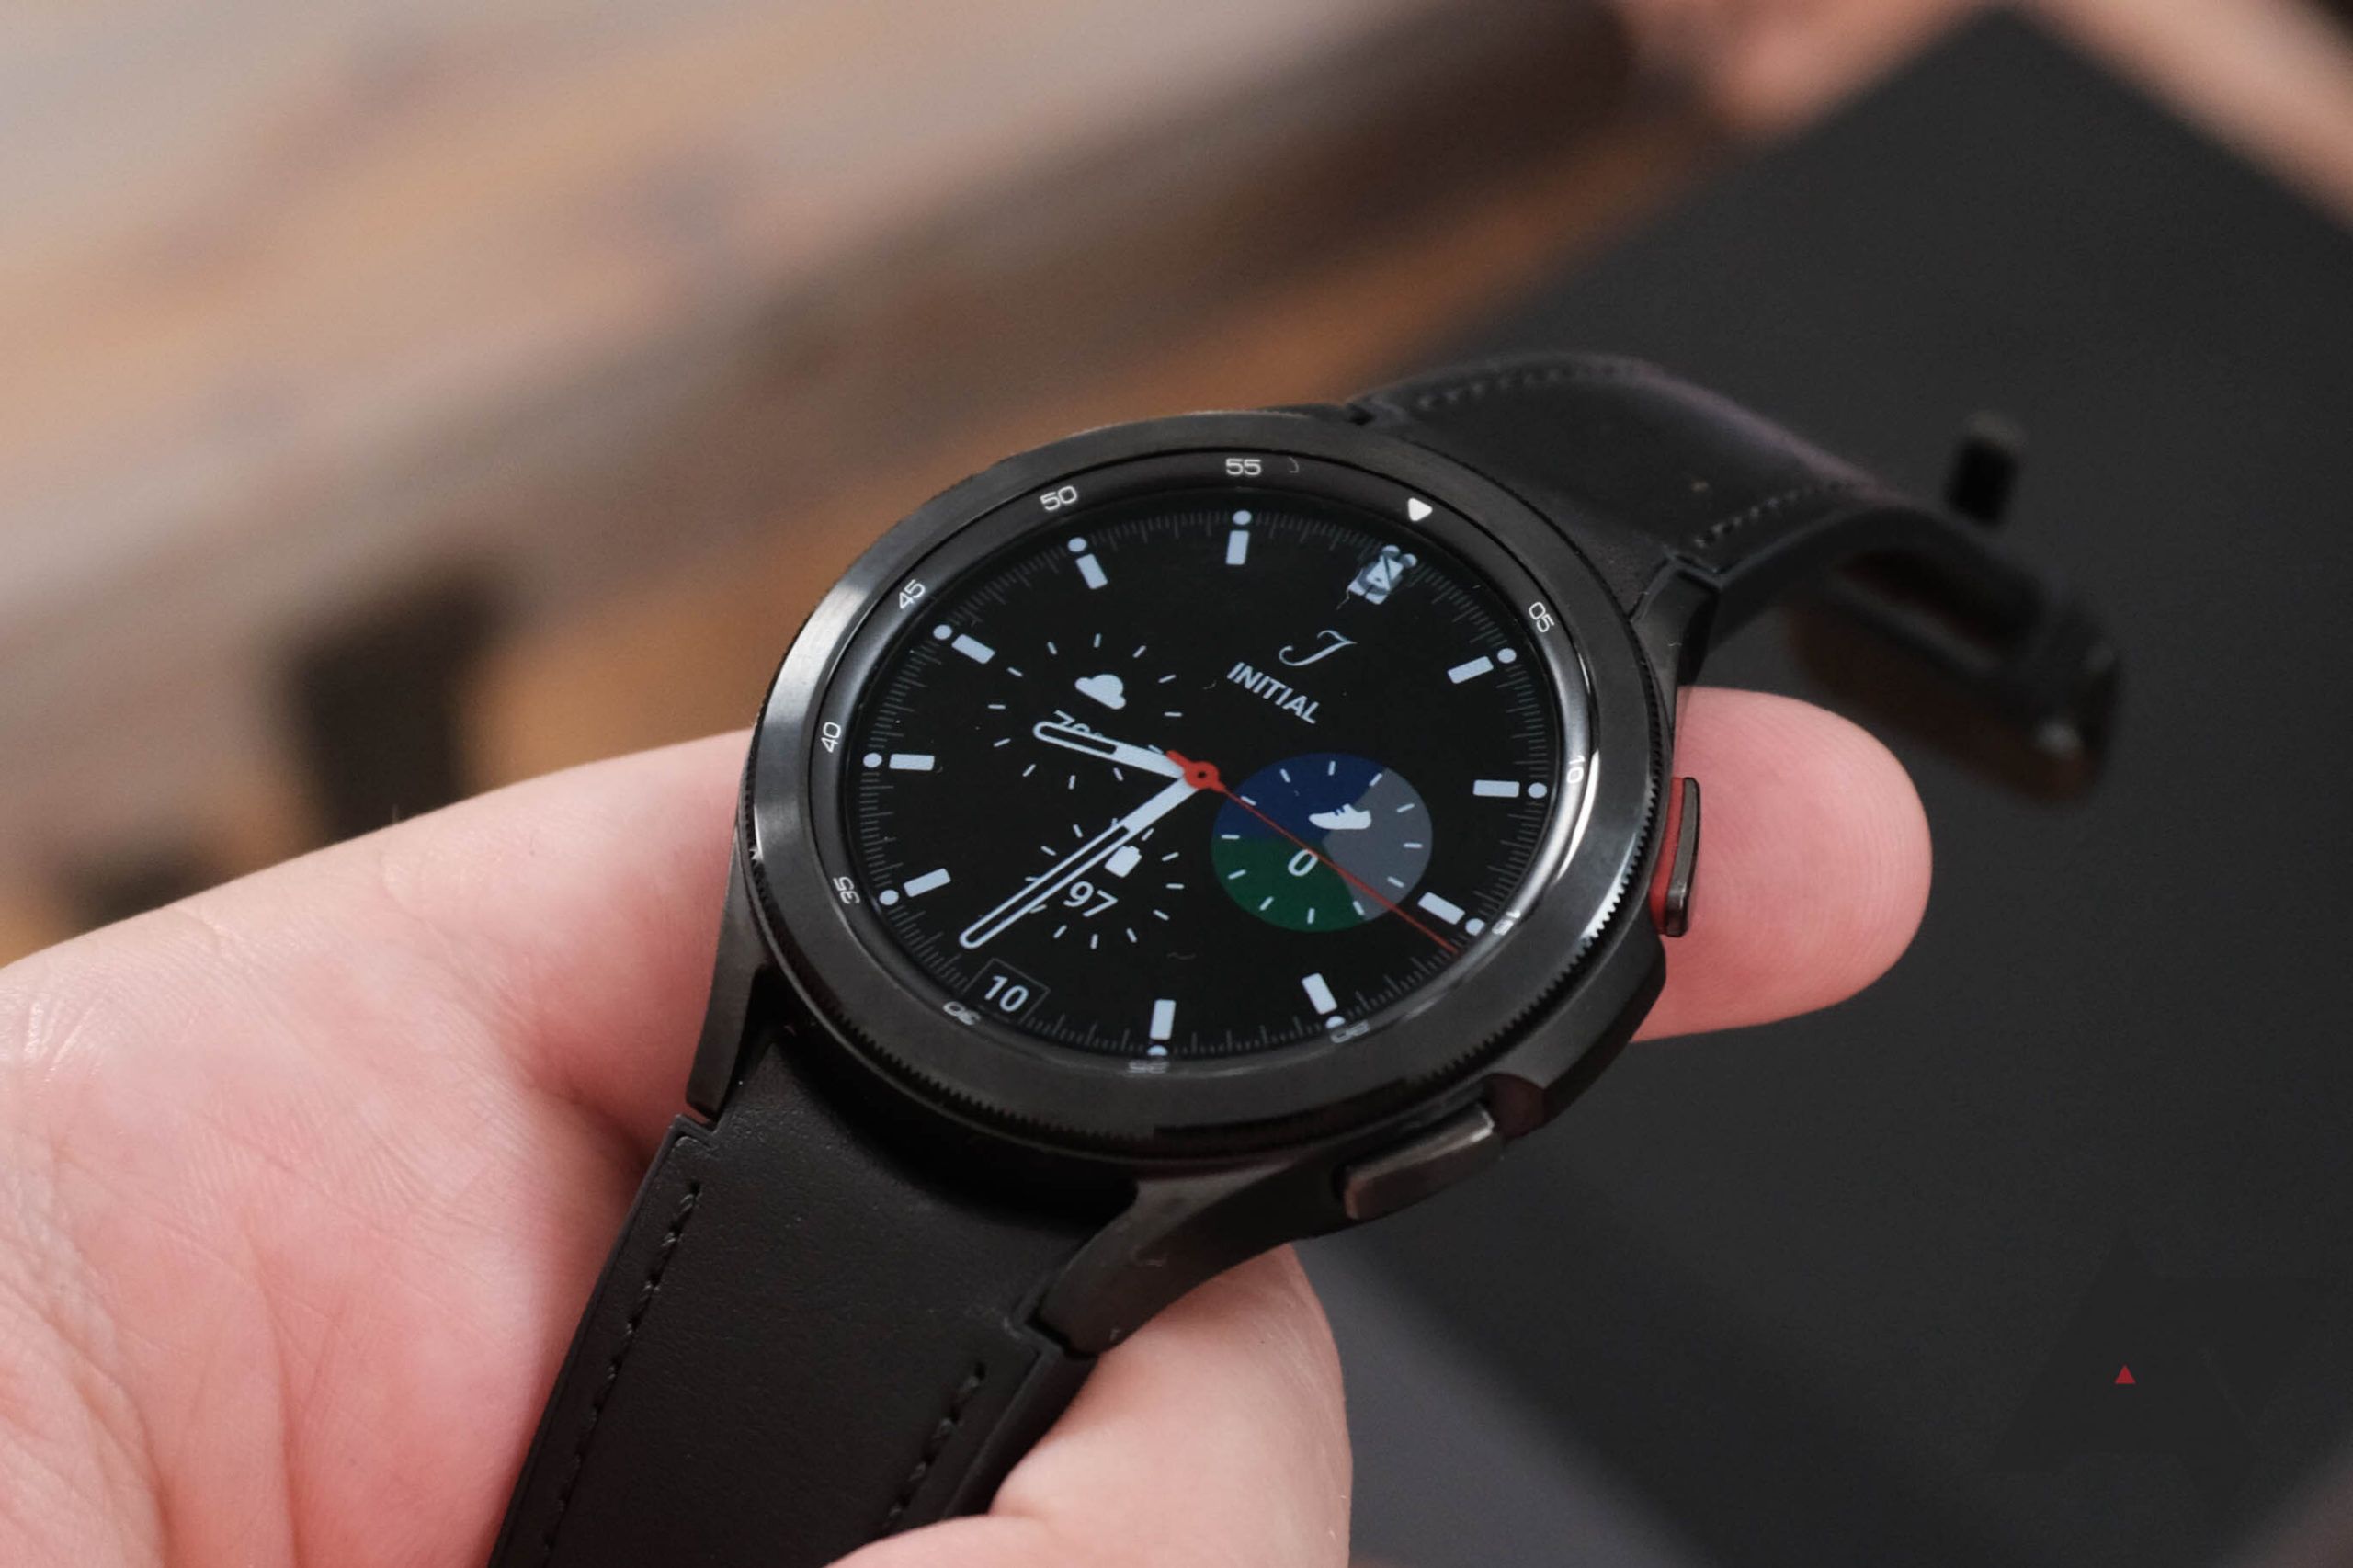 A Samsung Galaxy watch being held face up